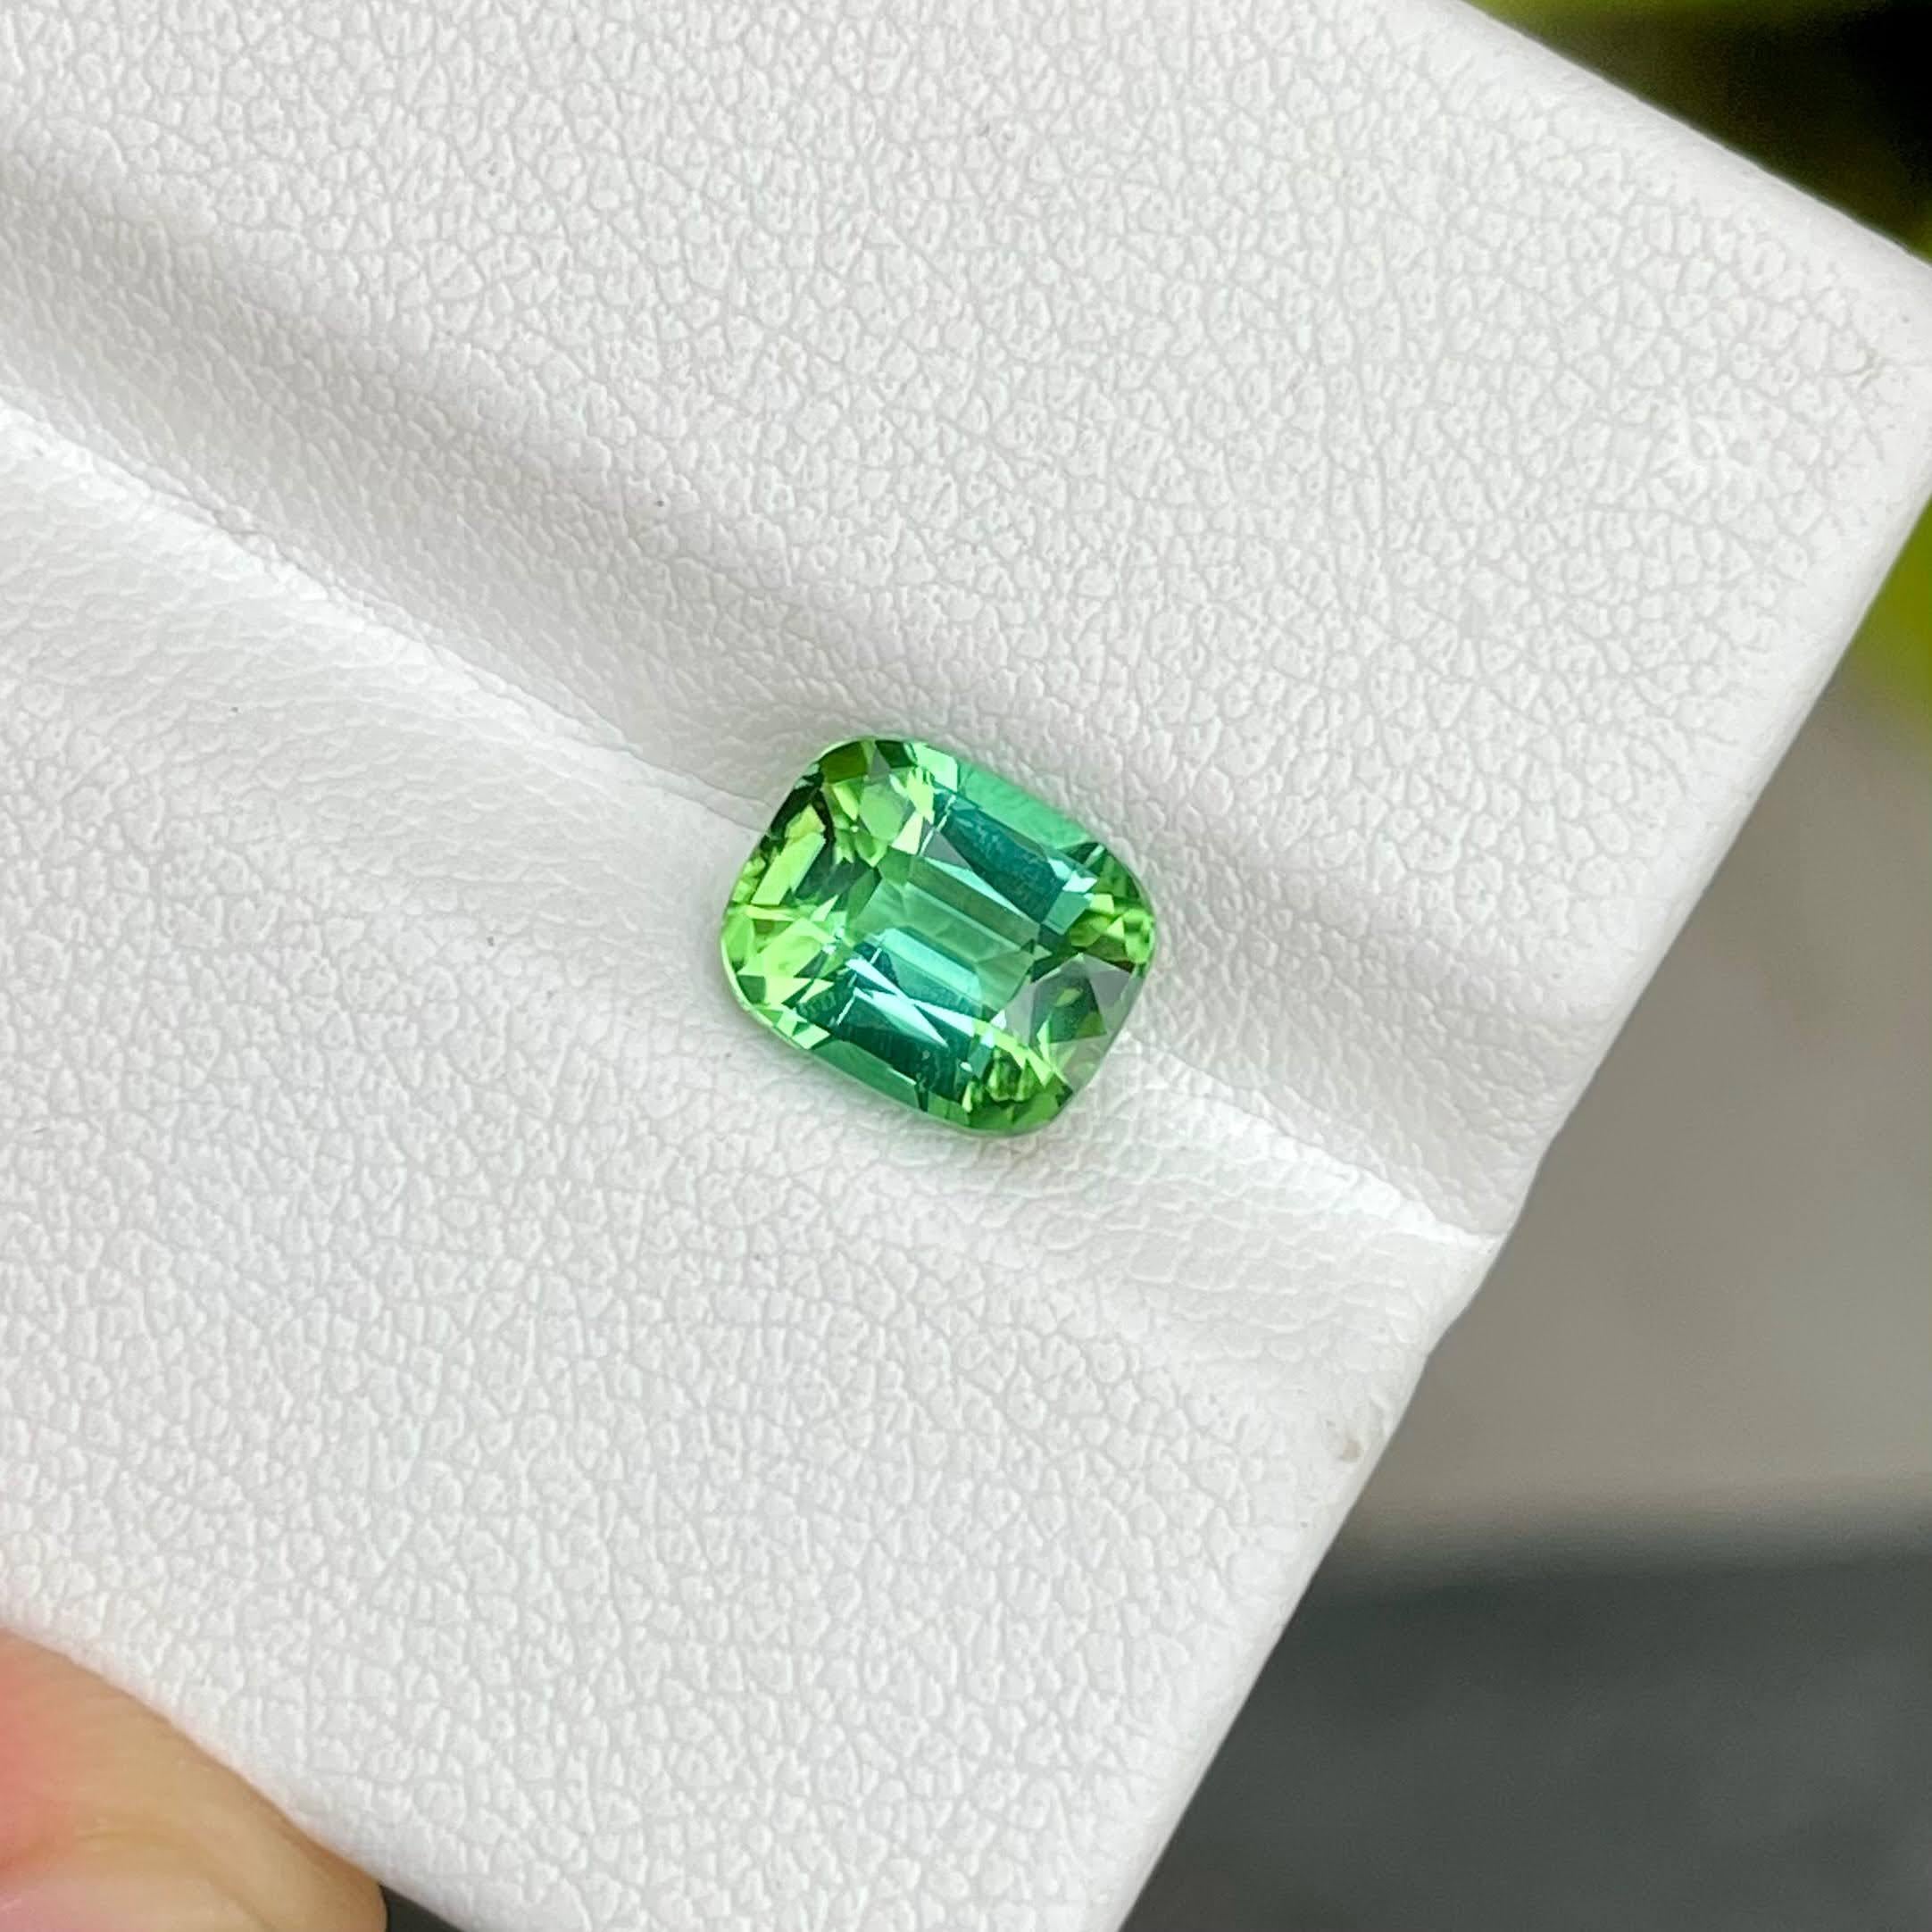 Weight 1.90 carats 
Dimensions 7.9x6.5x5.1 mm
Clarity VVS
Origin Afghanistan
Treatment None
Shape Cushion
Cut Step Cushion




In a breathtaking display of nature's artistry, a 1.90-carat Greenish Blue Tourmaline takes center stage, showcasing a